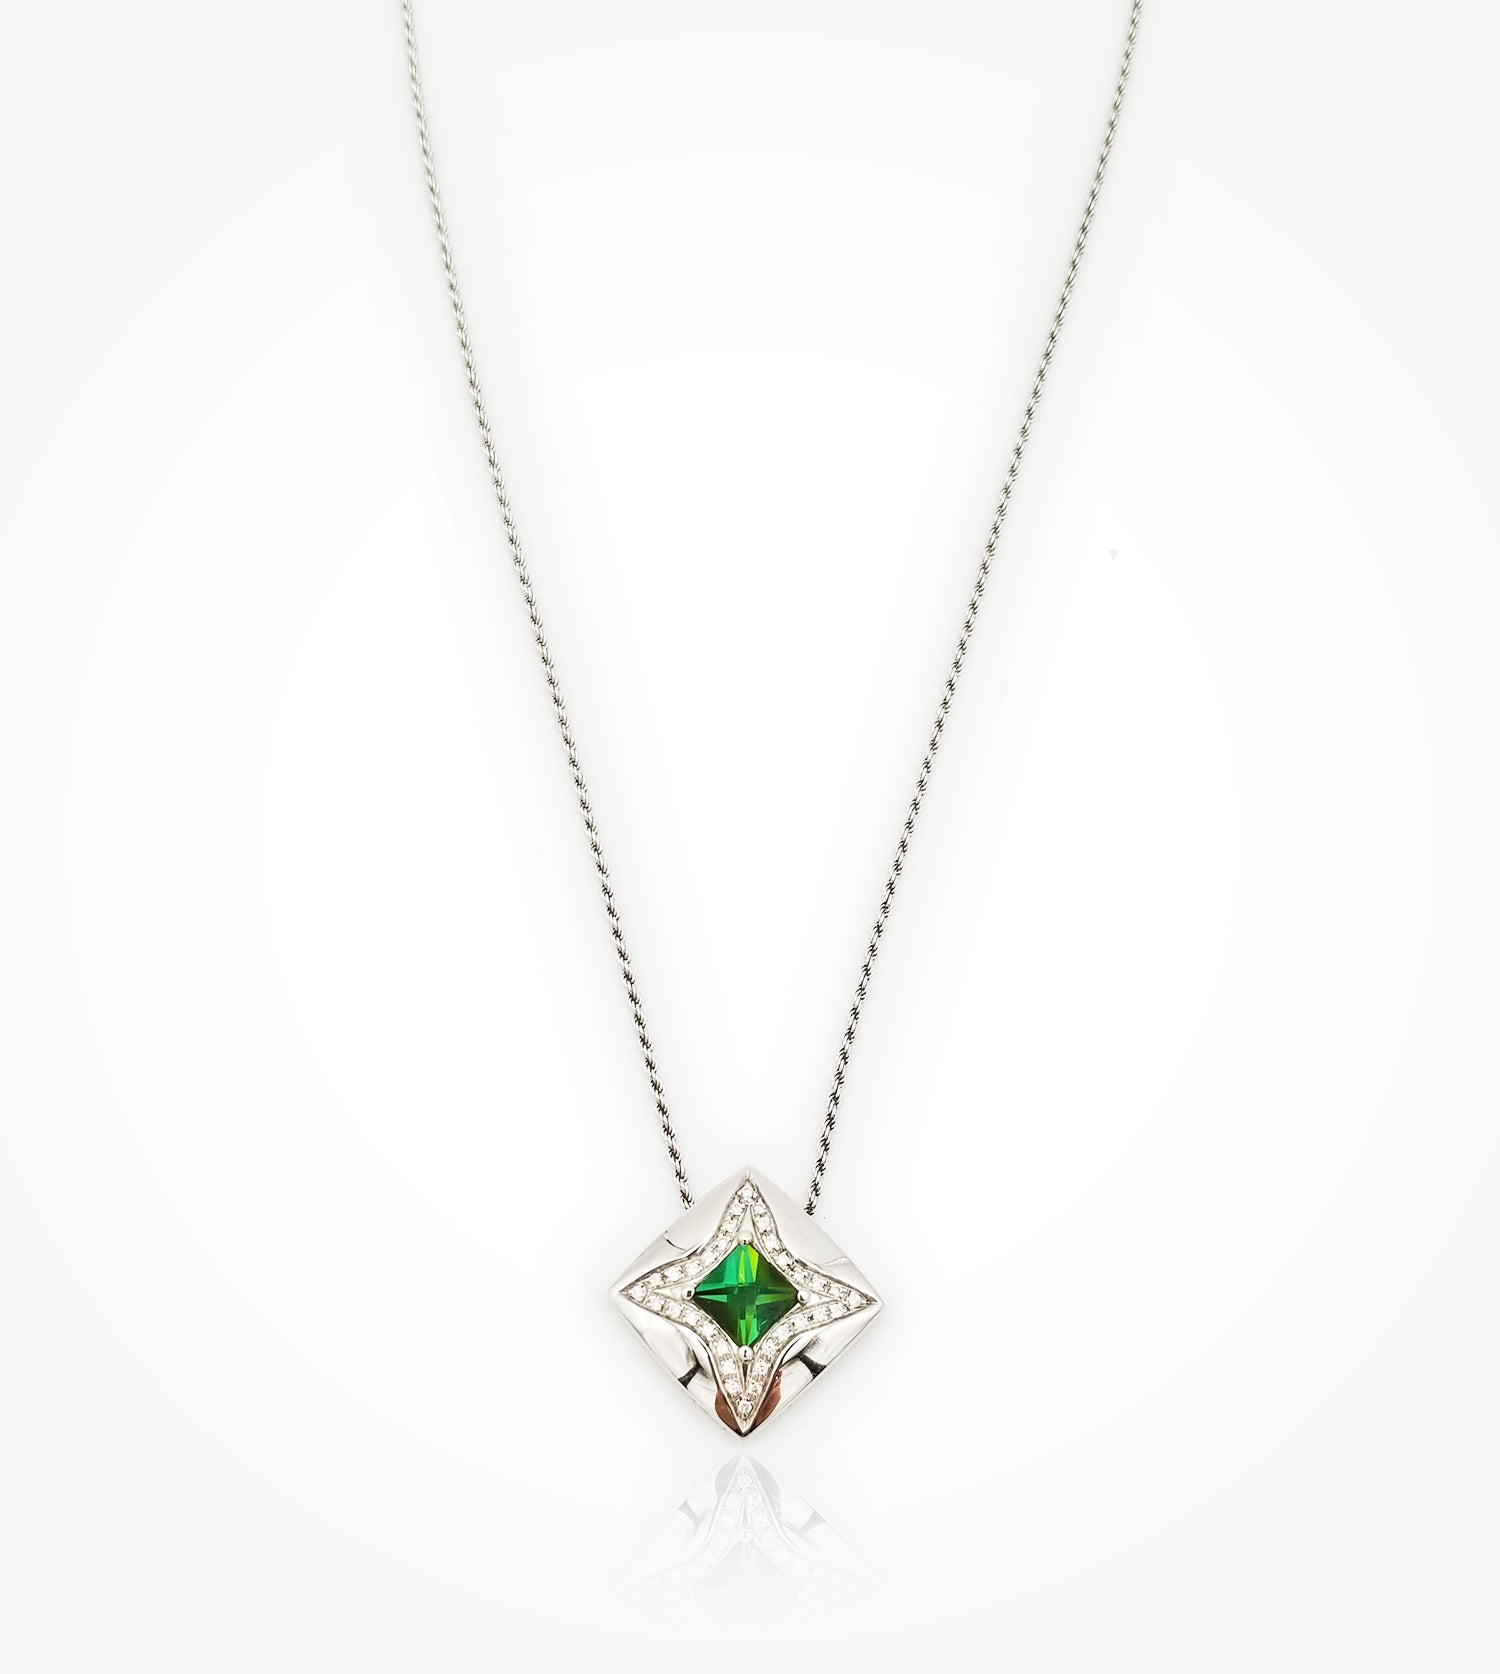 ND-003658  18KW mirror cut green tourmaline =1.36cts and 32diamonds=0.16cts necklace